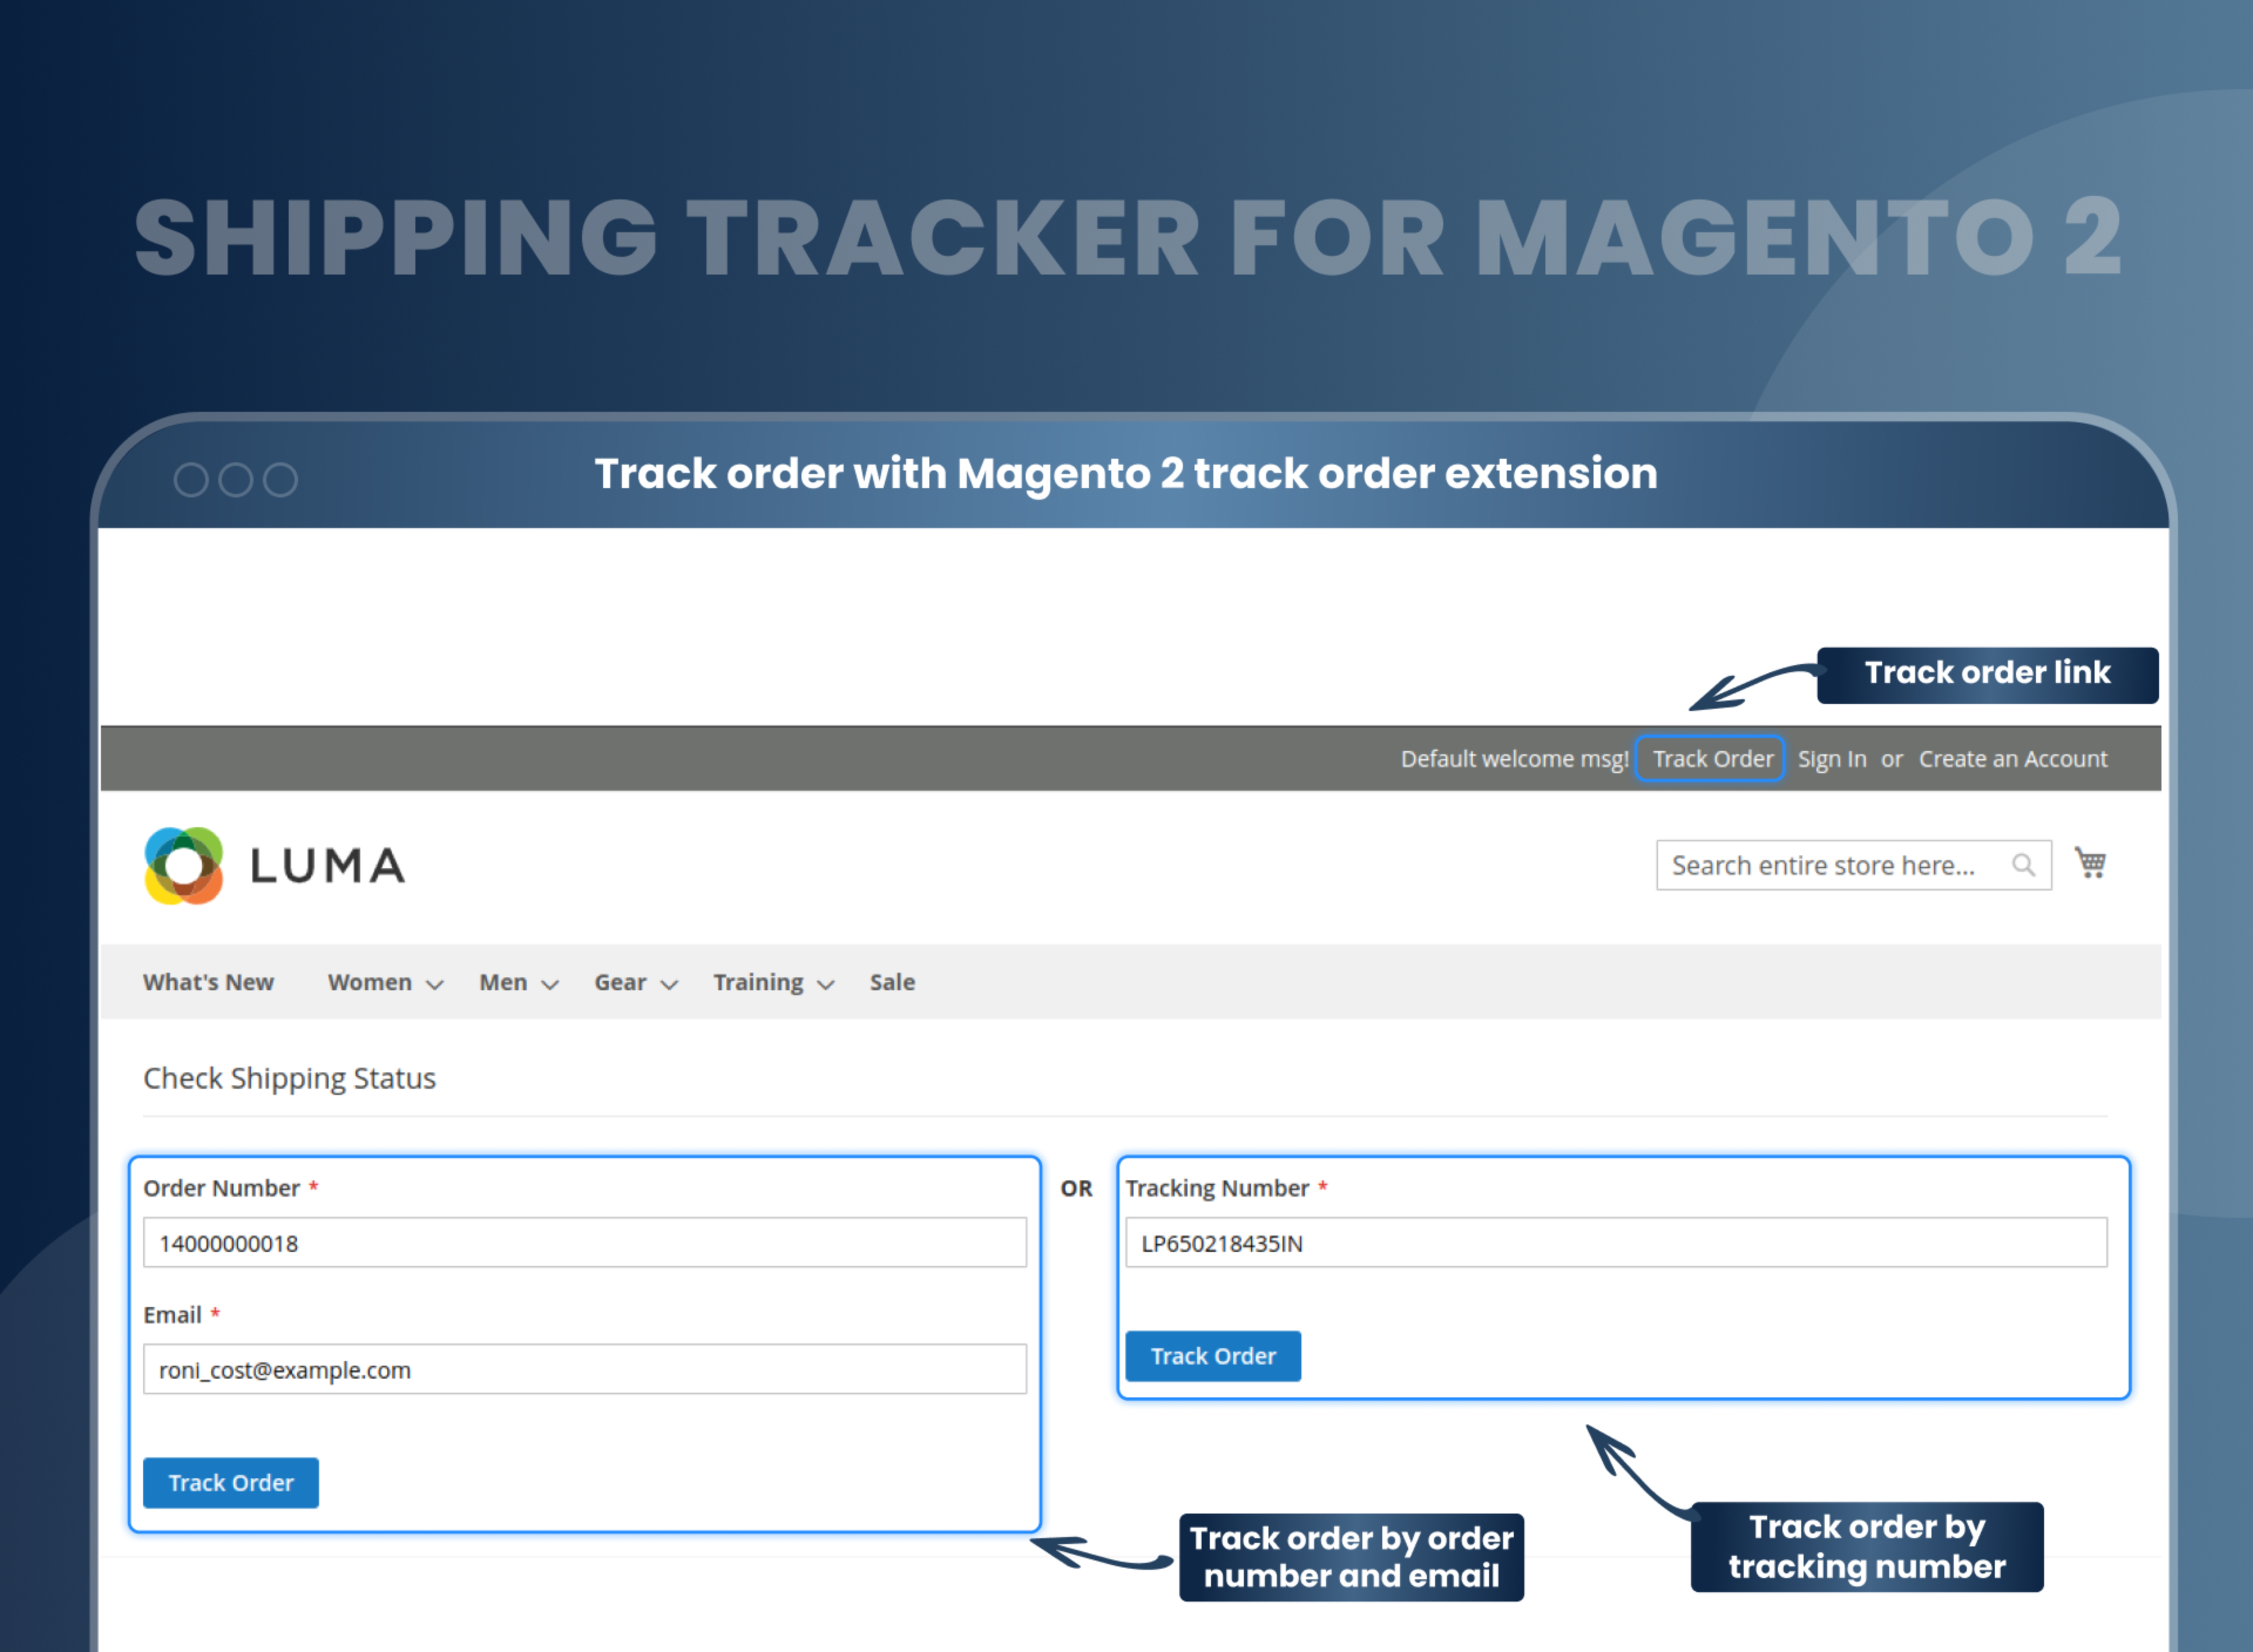 Track order with Magento 2 track order extension